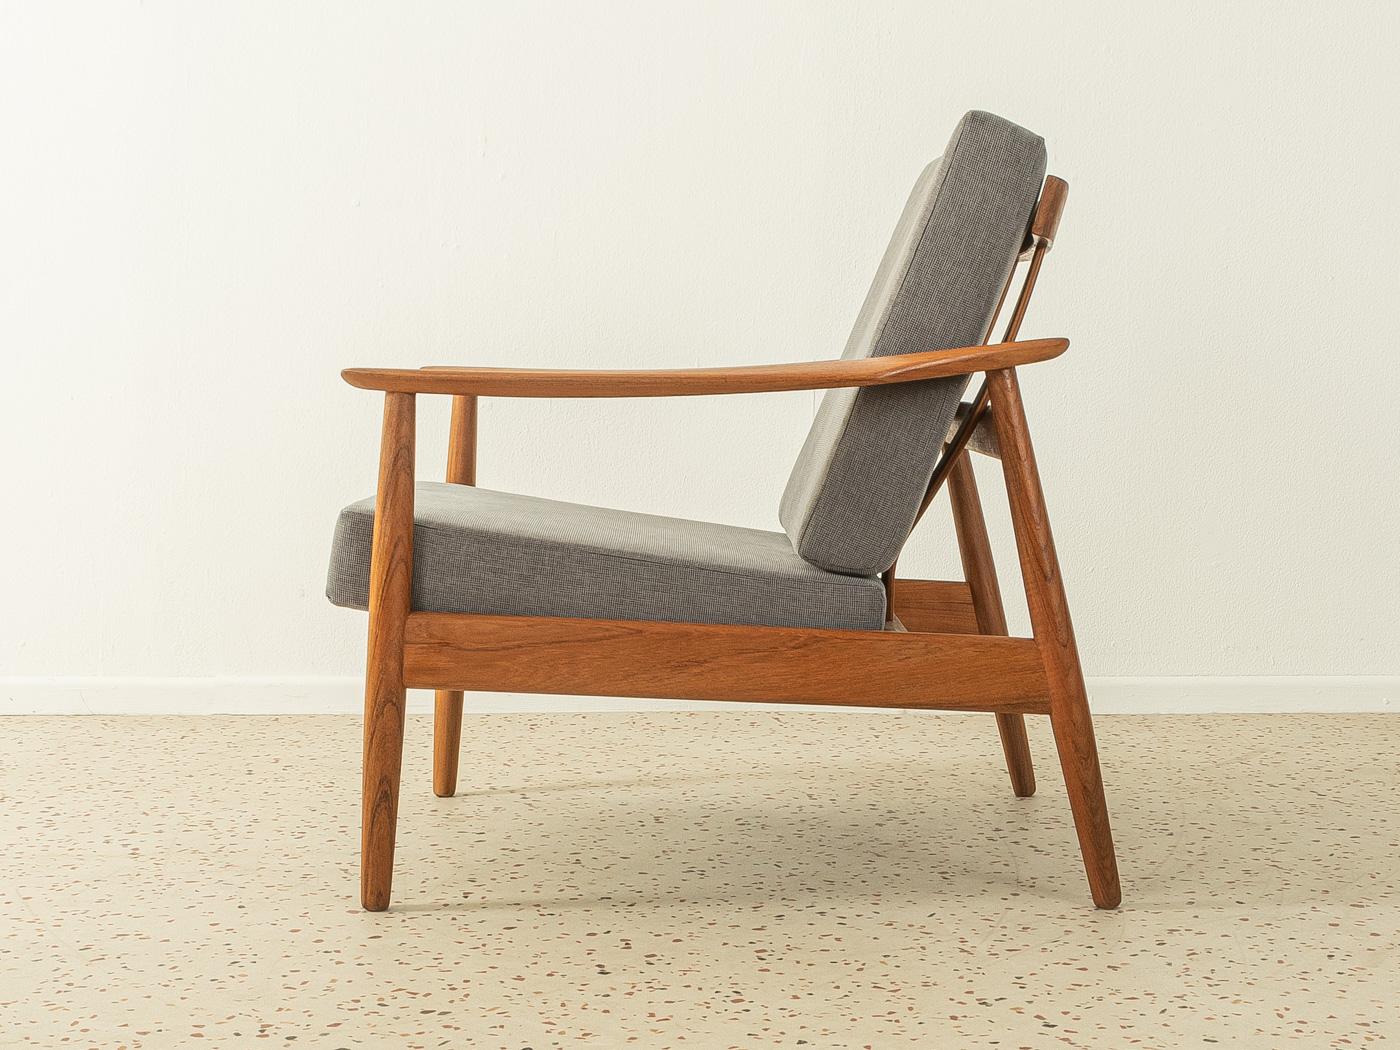 Rare armchair from the 1960s. Model FD 164 by Arne Vodder for France & Søn with a high quality solid teak wood frame. The seat and backrest have been reupholstered and covered with a high-quality fabric in grey.

Quality Features:
- accomplished